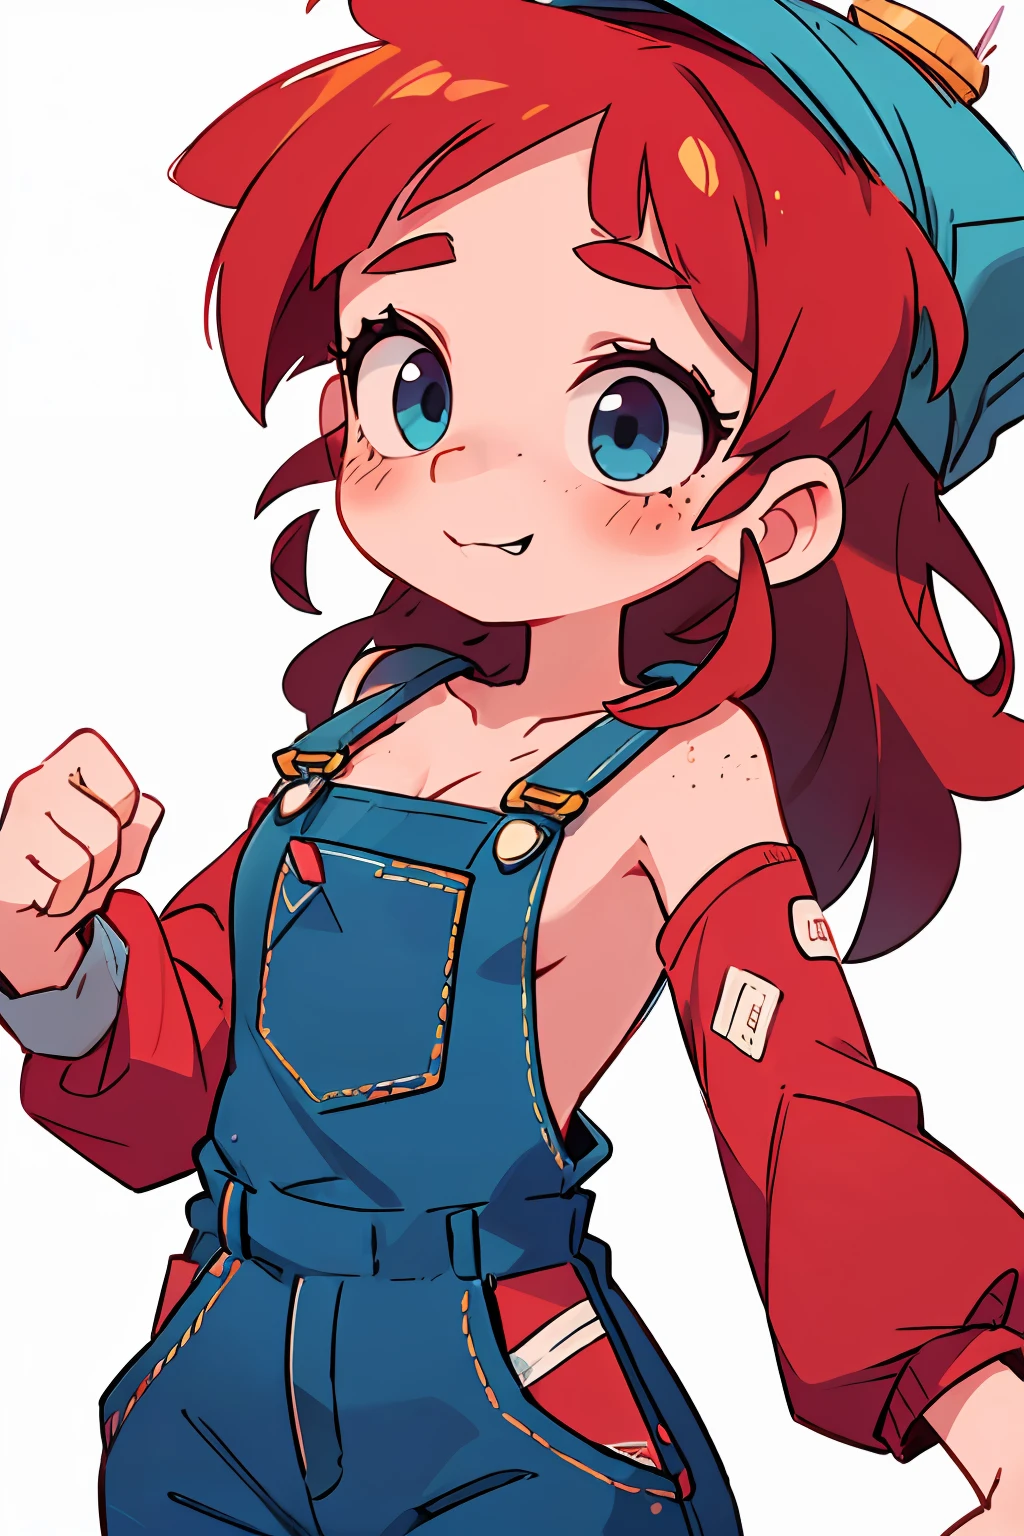 masterpiece, beautiful, 4k, detailed, intricate details, child, , overalls, jean overalls, cuffed overalls, red hair, long red hair, long straight hair, messy hair, tomboy, tomboy hair, tomboyish, bucktooth, soft blue eyes, soft smile, slight smile, hands back, standing on the balls of her feet, 1girl, rocking, shirtless, overalls over skin, bare shoulders, bare sleeves, bare arms, medium sized breasts, cleavage, cleavage behind overalls, facing forward, side cut, torso shown, band aid, freckles, short, young, super short,  body